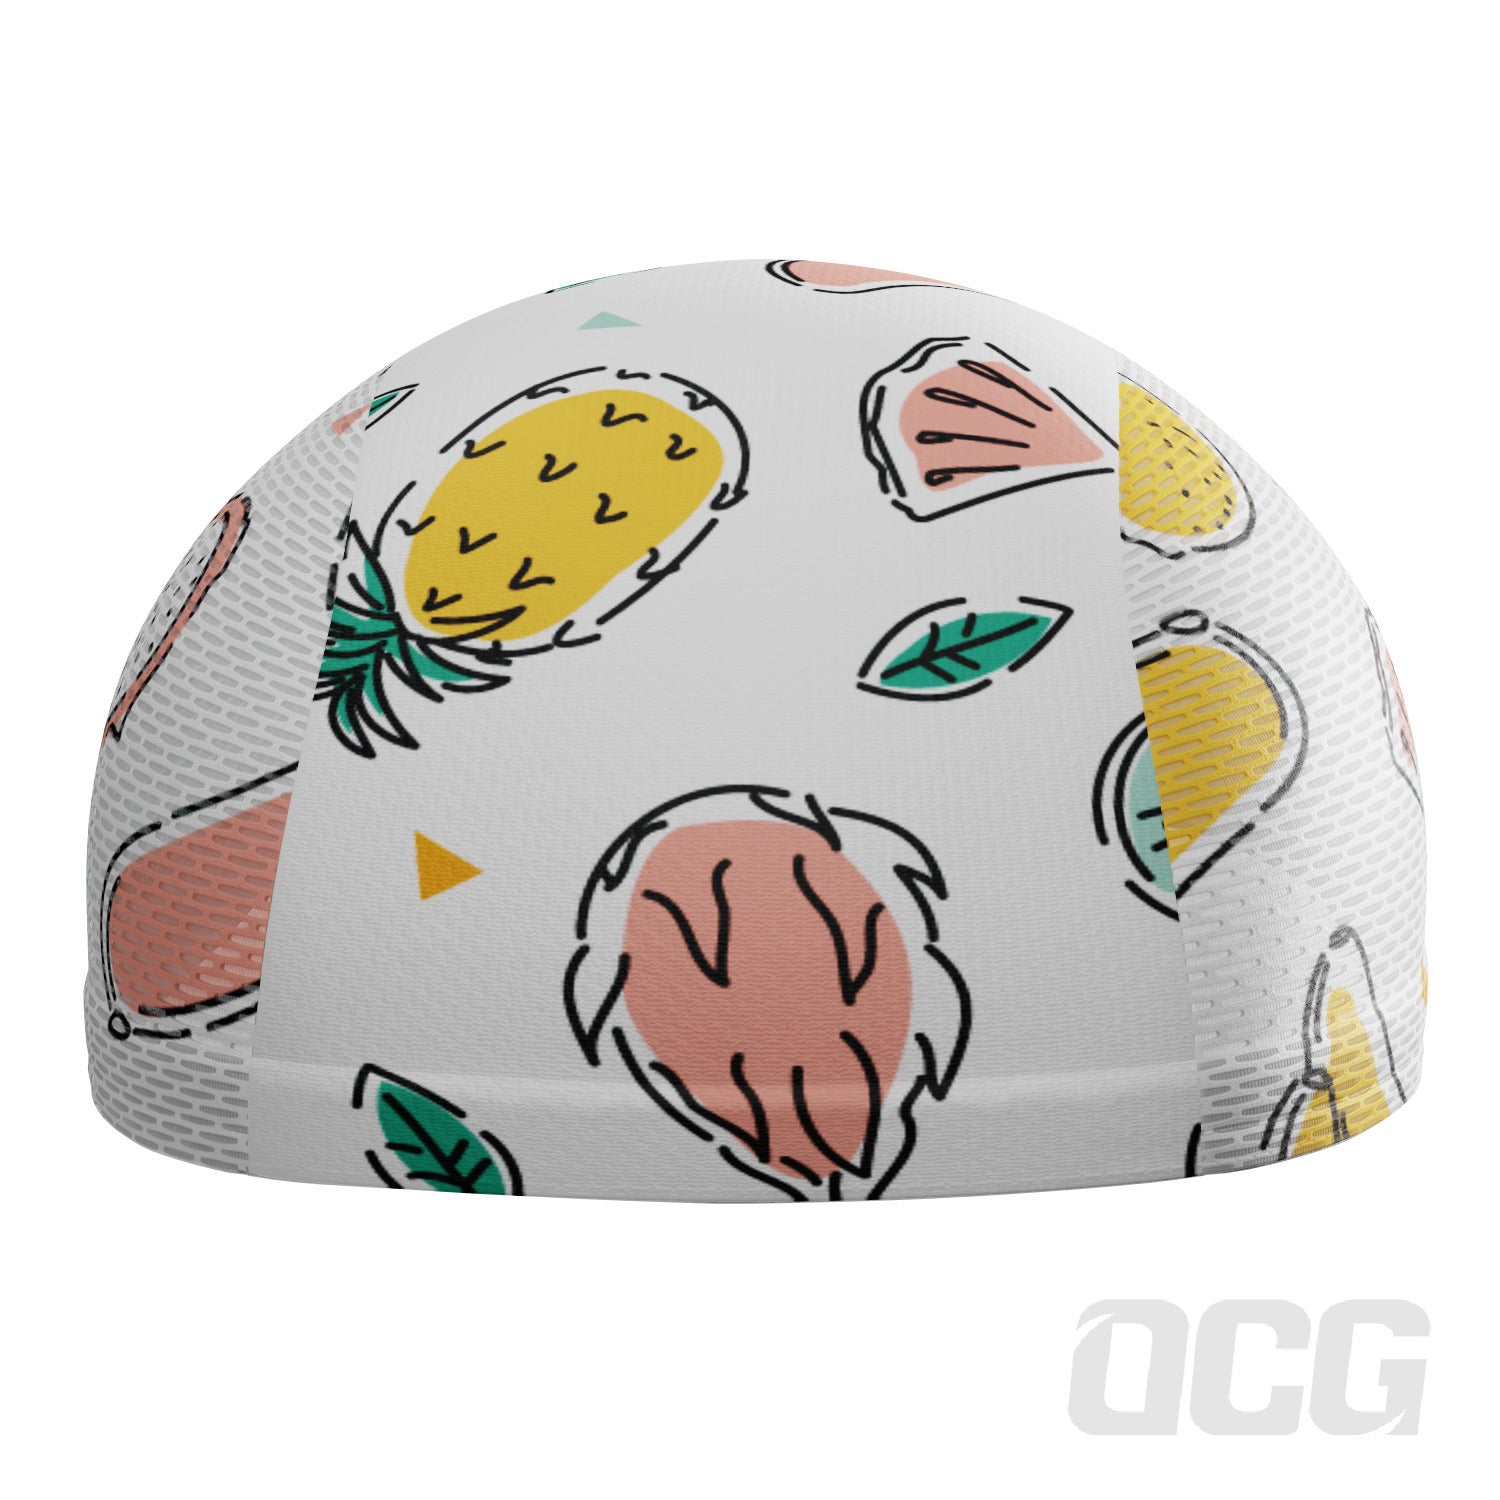 Unisex Squeeze The Day Quick Dry Cycling Cap